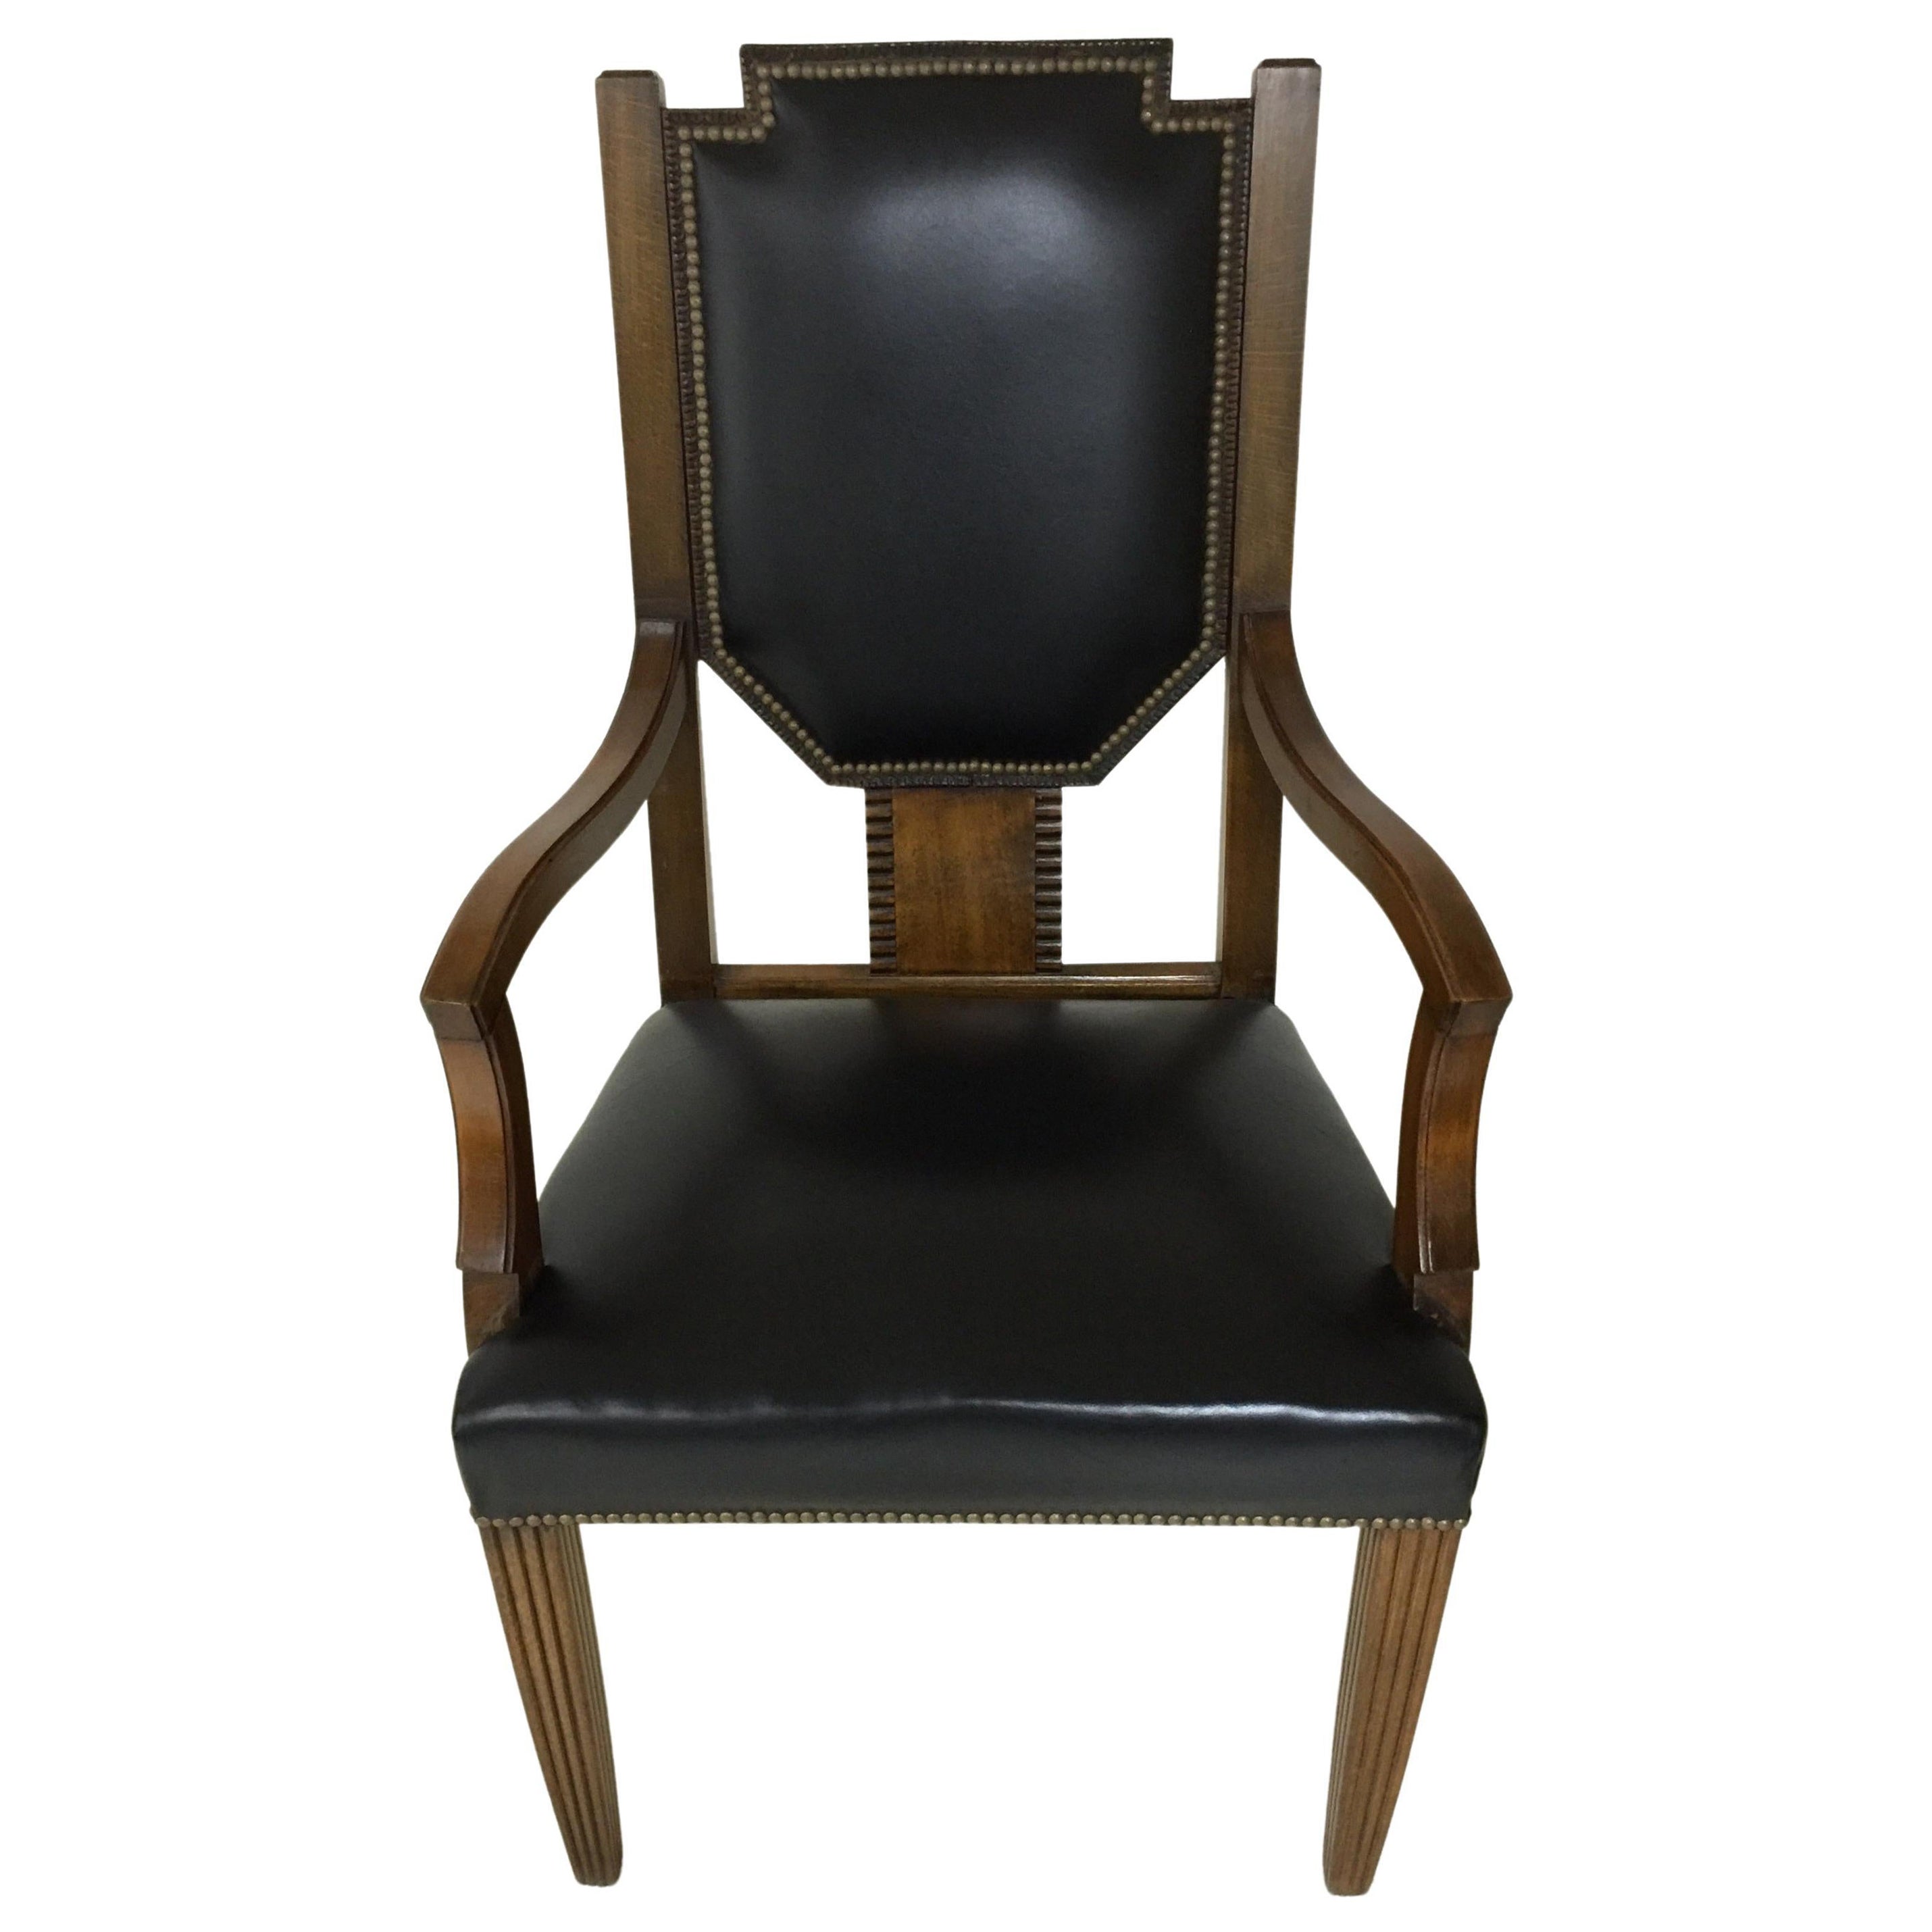 Desk Chair for the King, Style: Art Deco, 1930, German